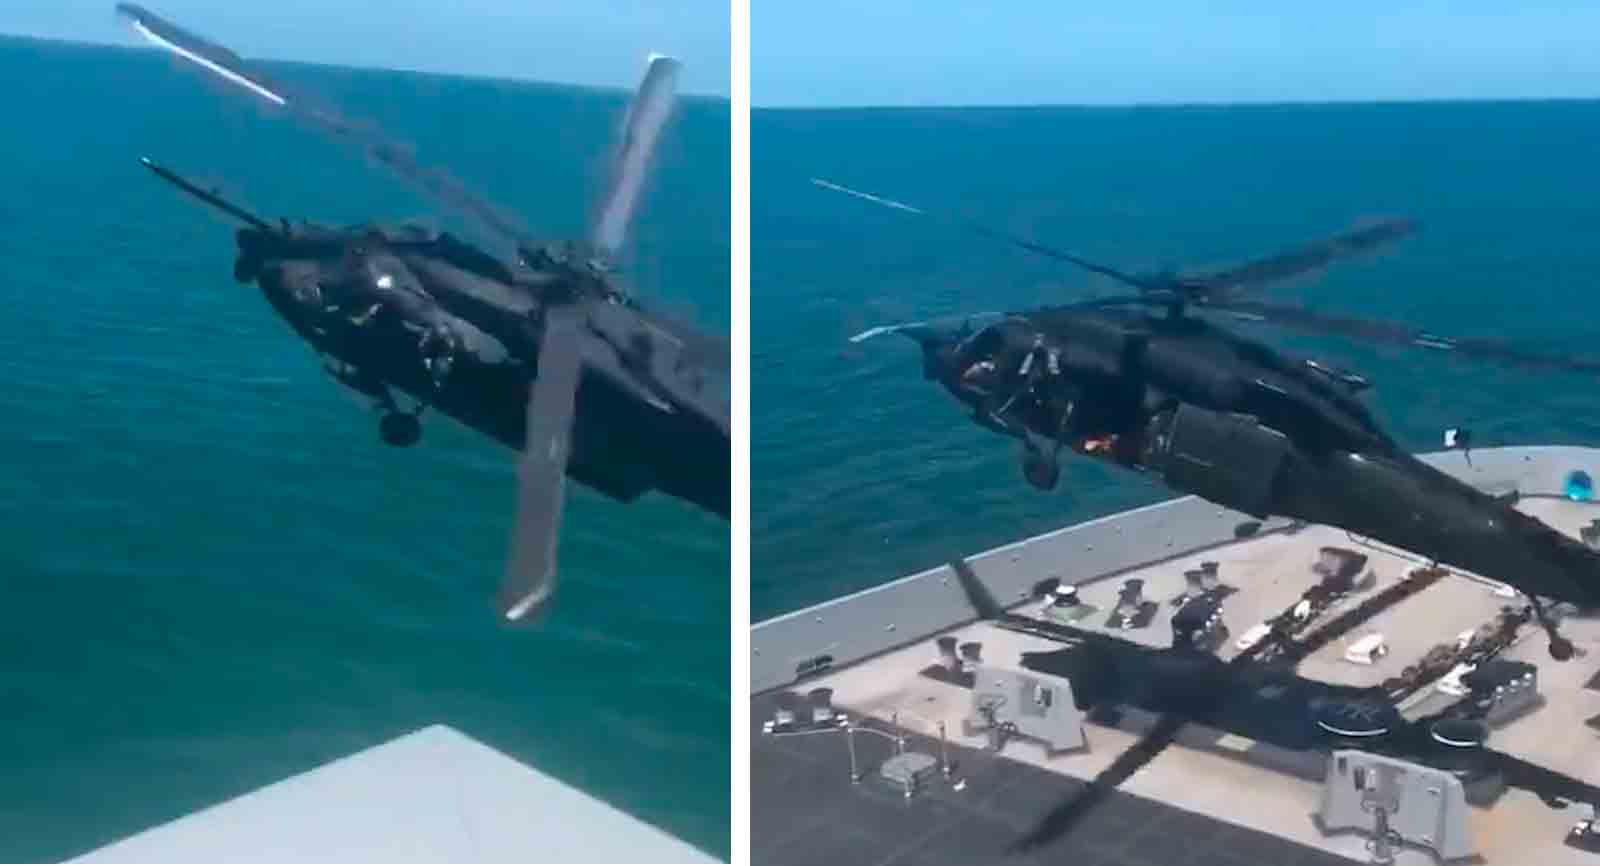 Incredible video shows the interception and invasion of a moving ship by a US Army helicopter. Photo and video: Reproduction twitter @stallhornlulul